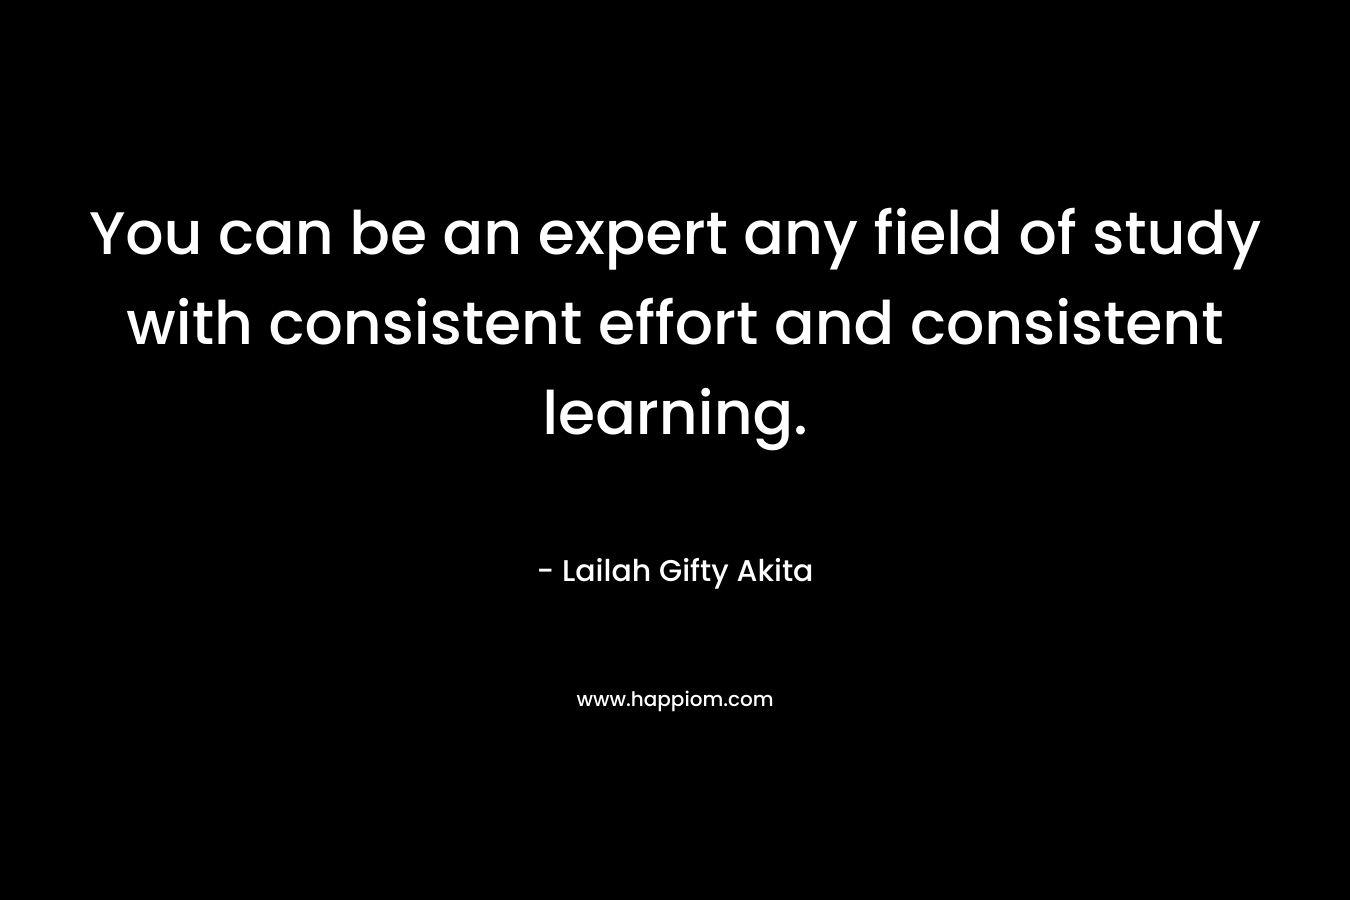 You can be an expert any field of study with consistent effort and consistent learning.